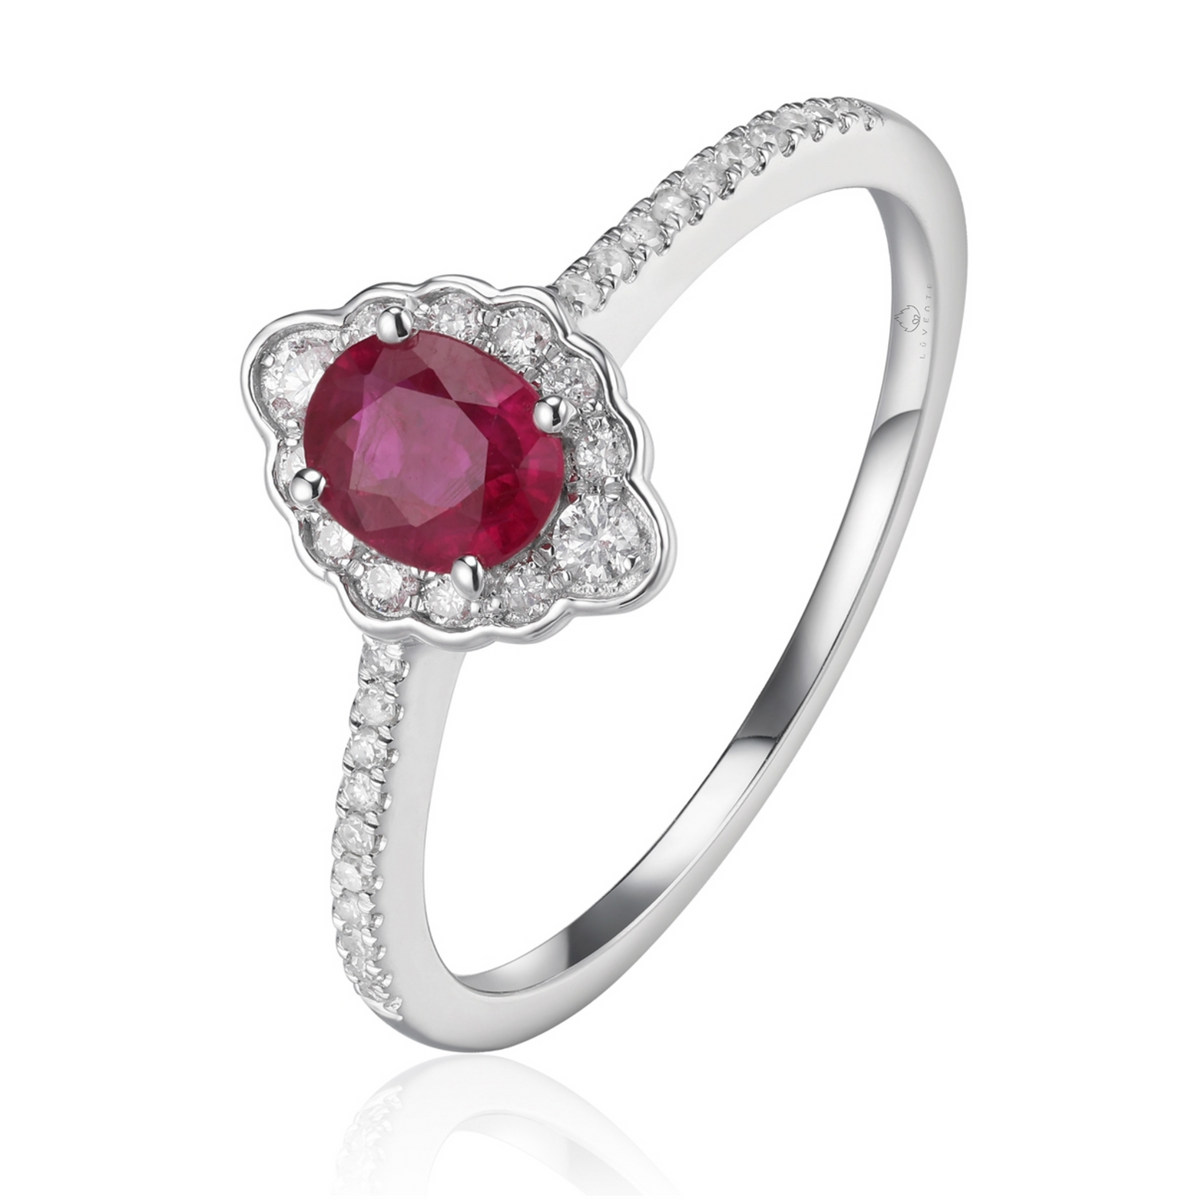 14K White Gold Oval Ruby Ring with Diamonds